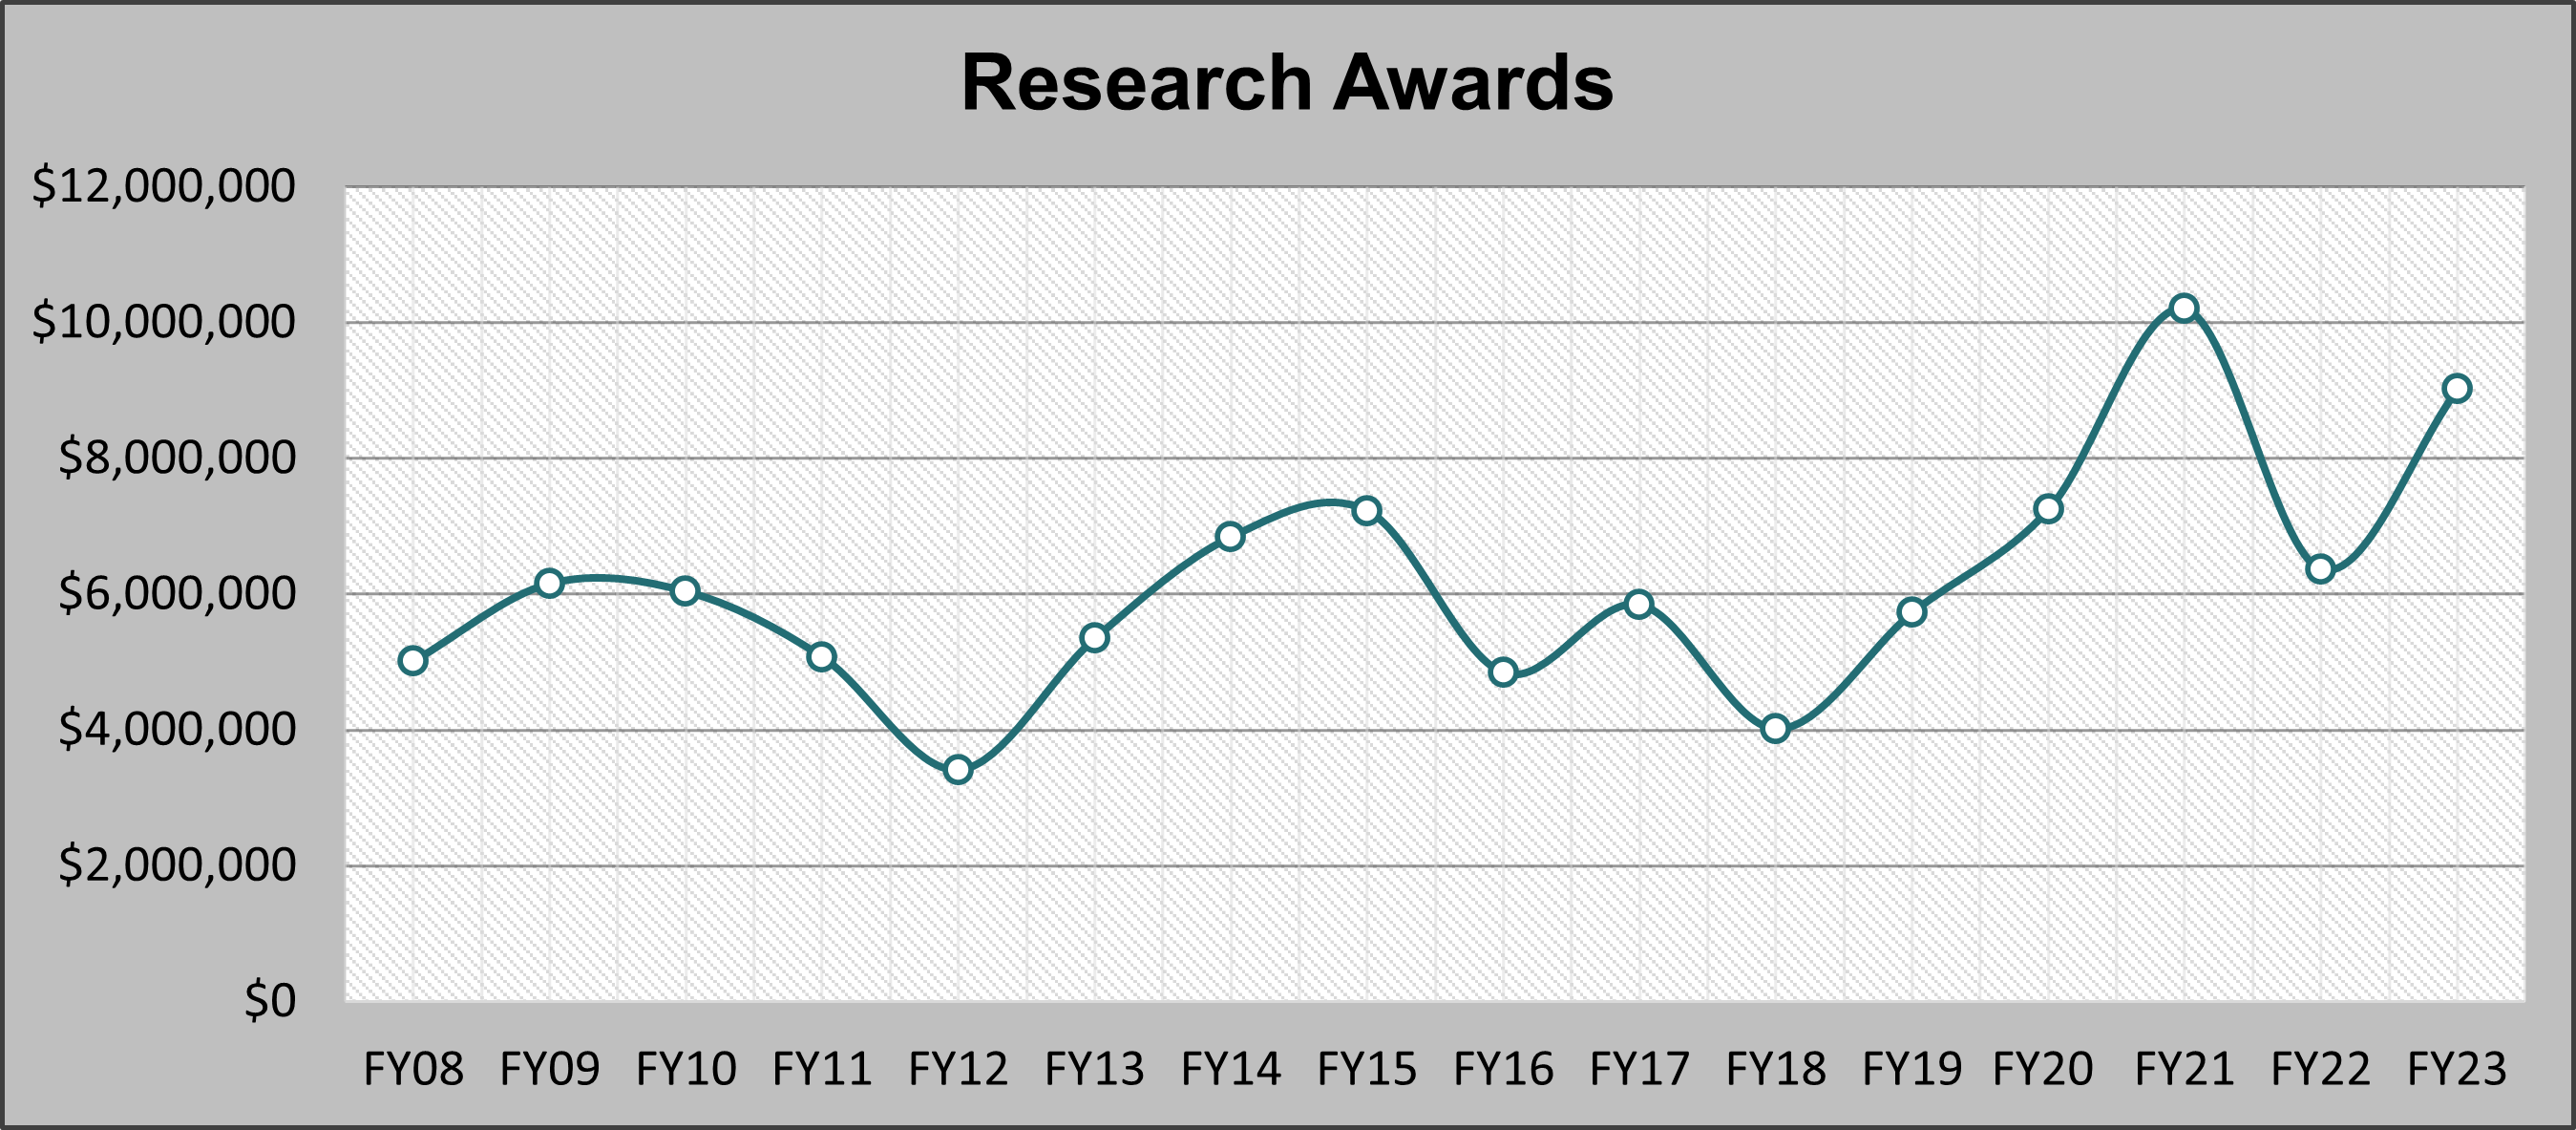 Chart of New Research Awards from FY08 to FY23